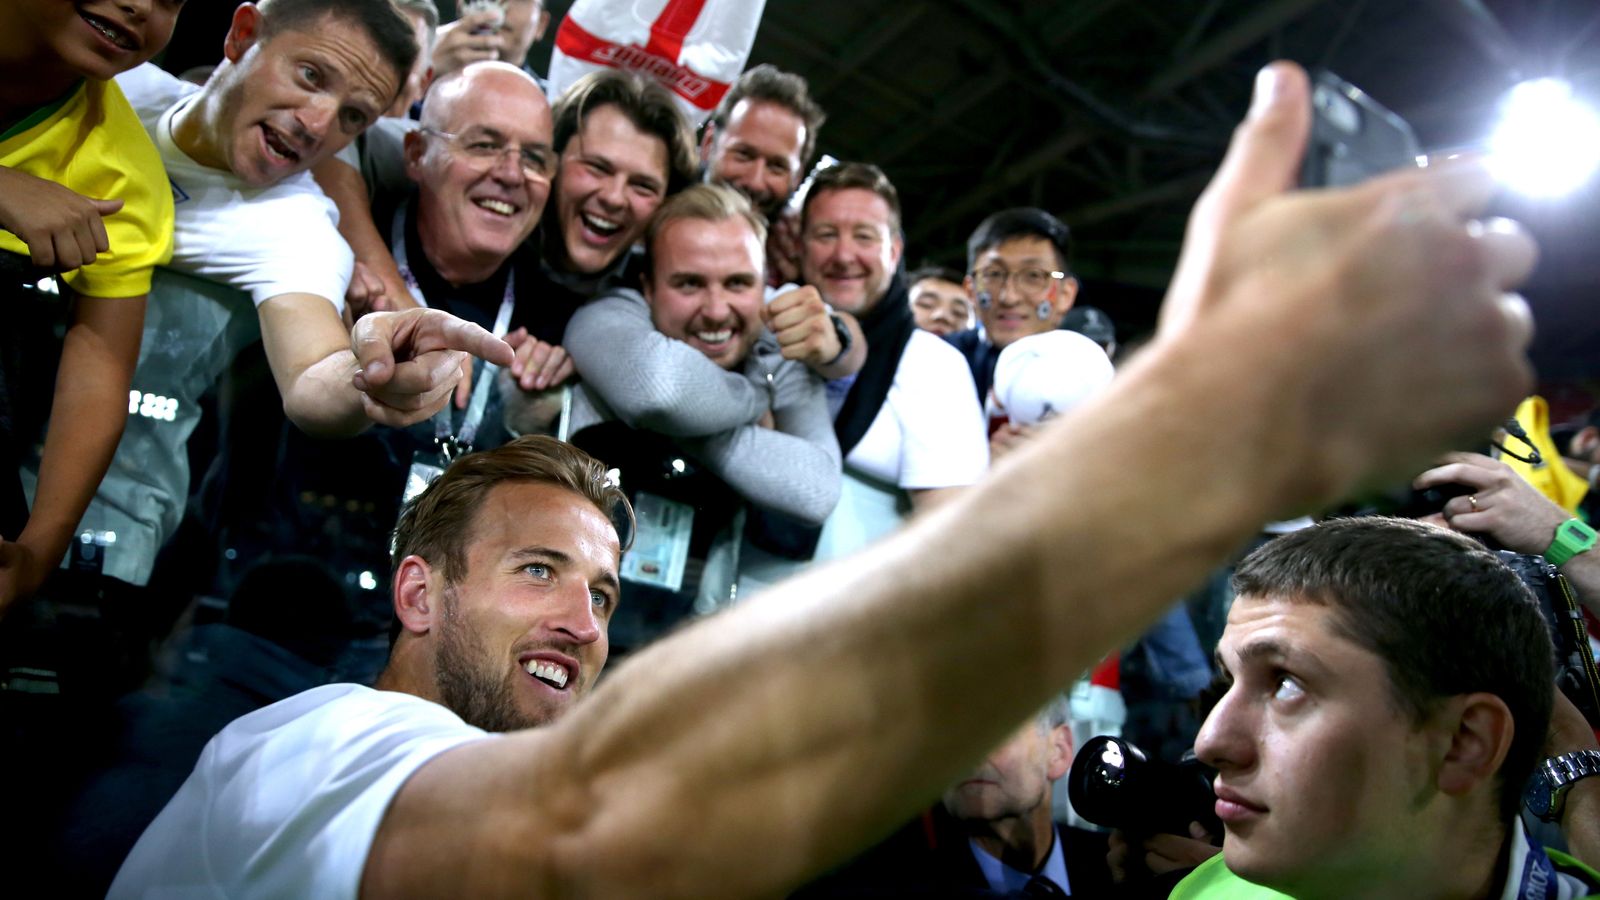 Euro 2020: Gareth Southgate says England team are a catalyst for bringing people together